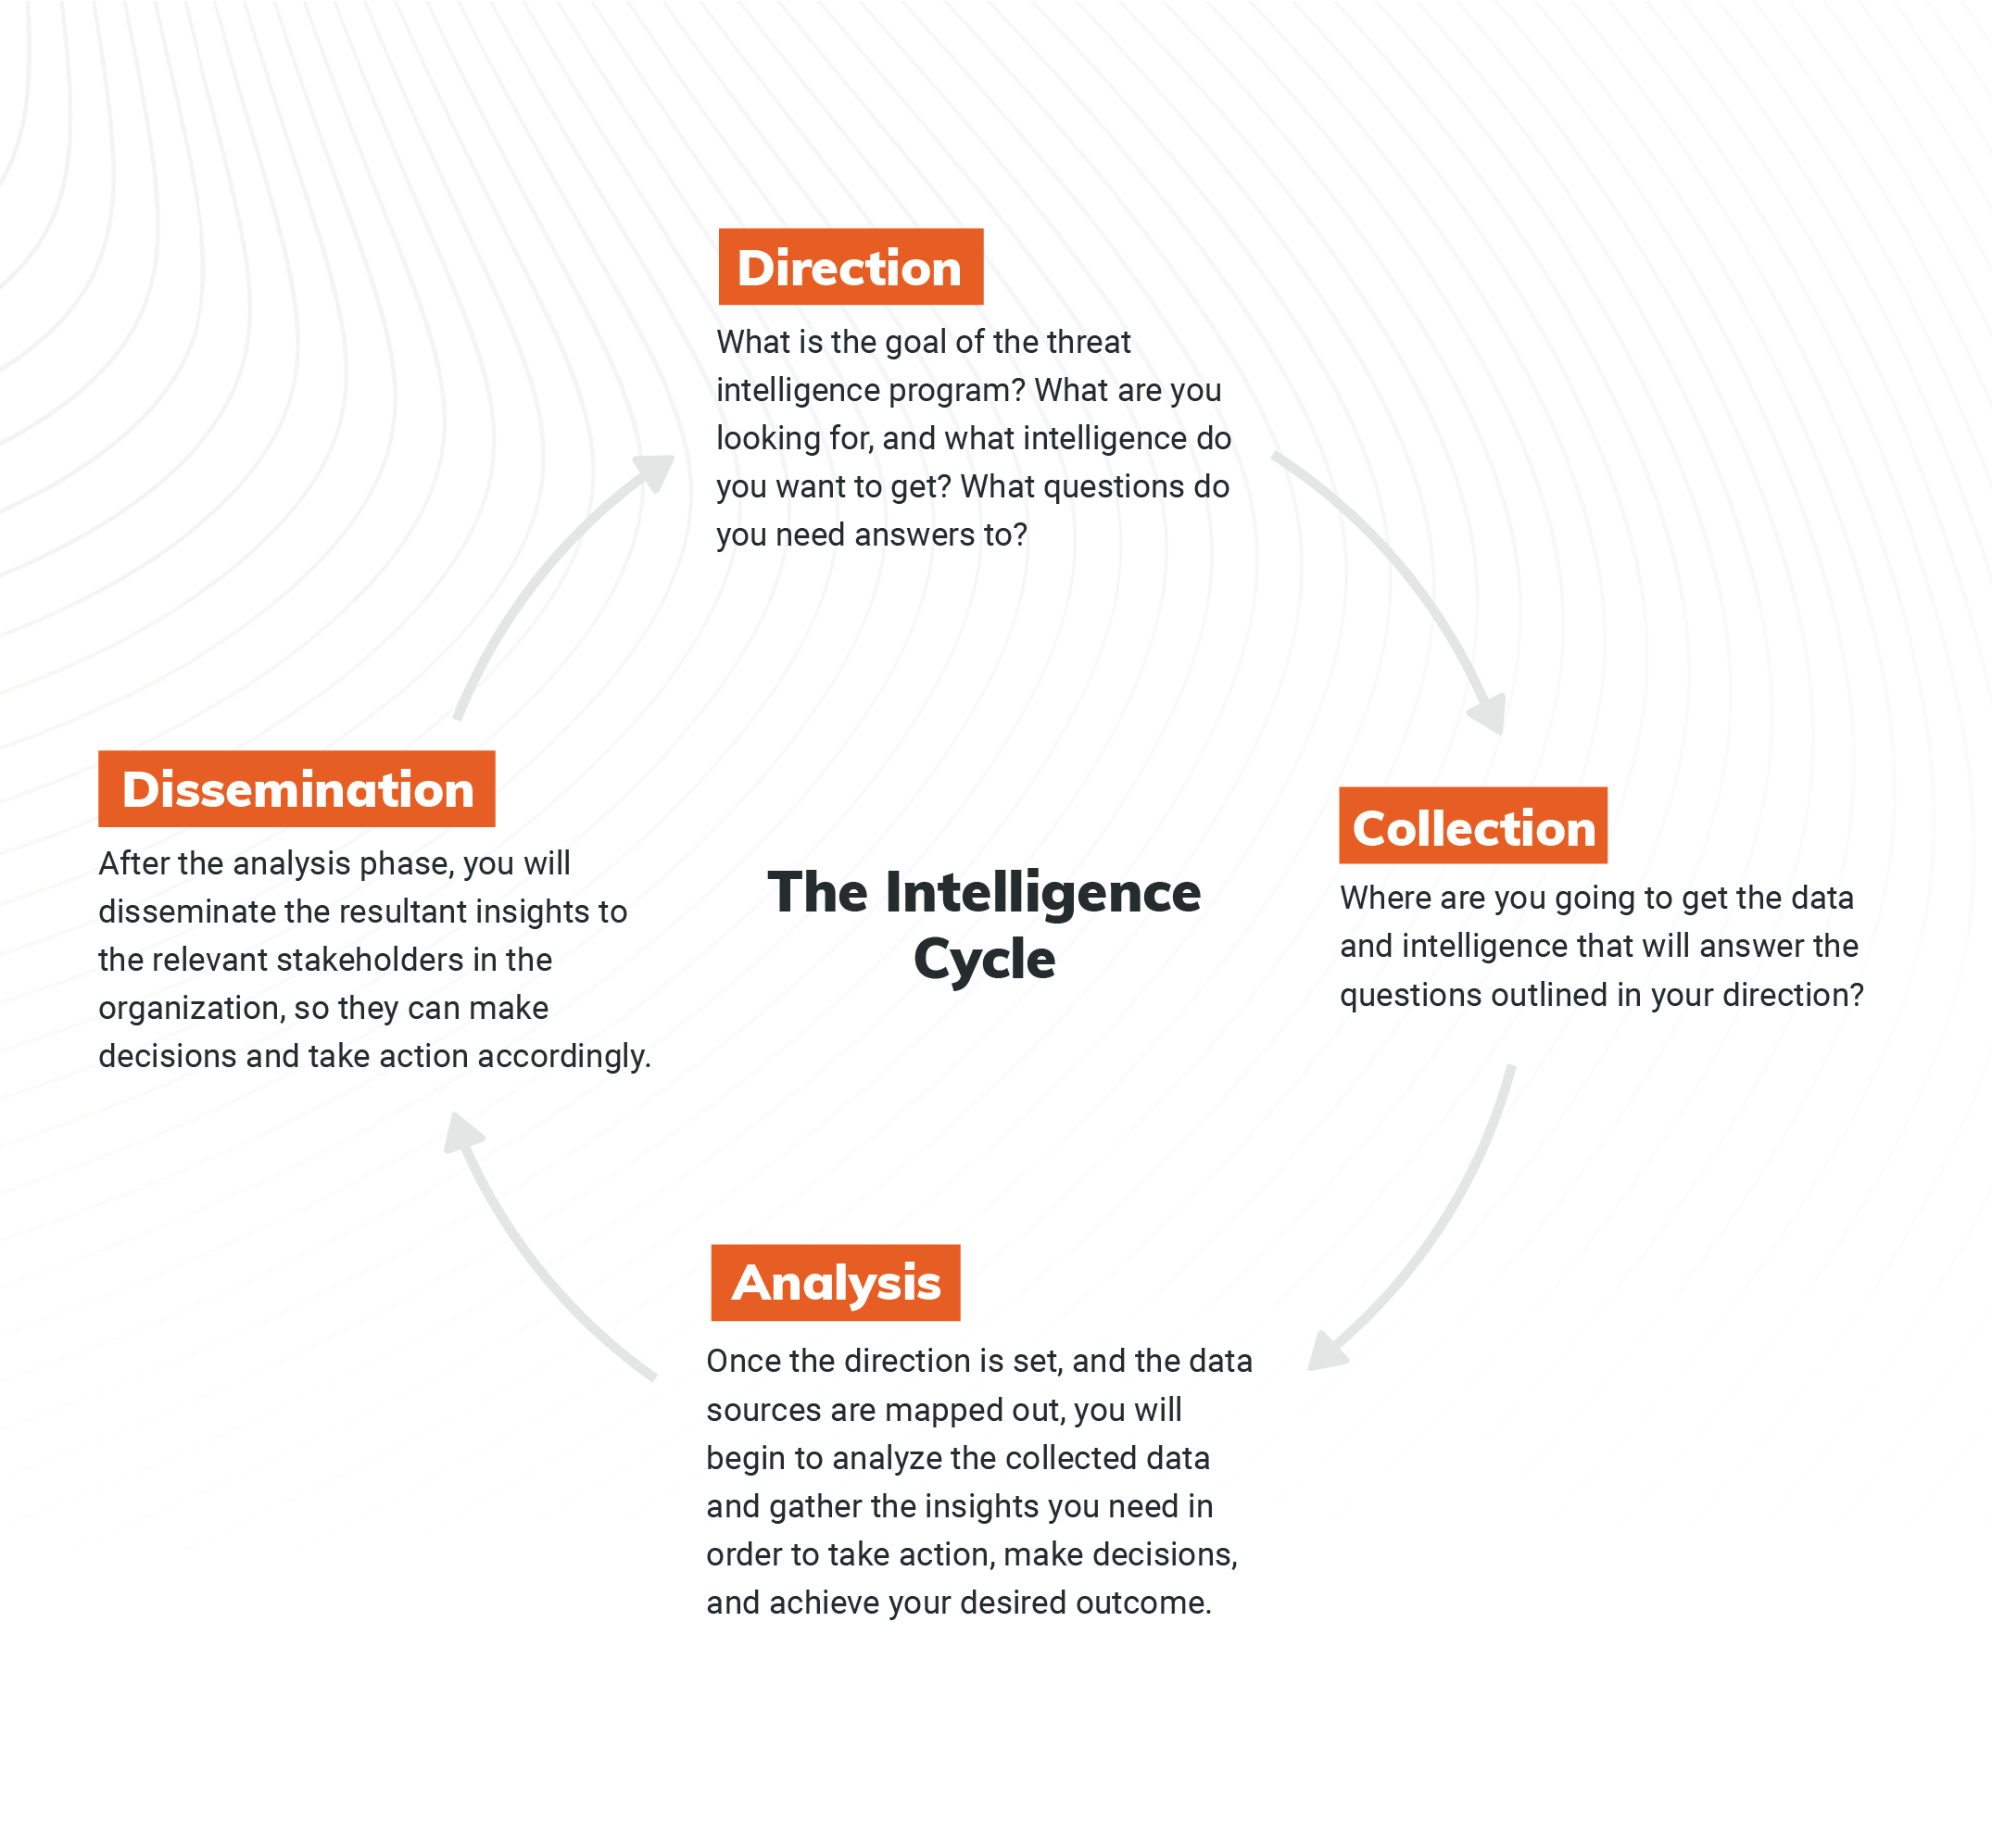 4 Simple Steps for an Effective Threat Intelligence Program